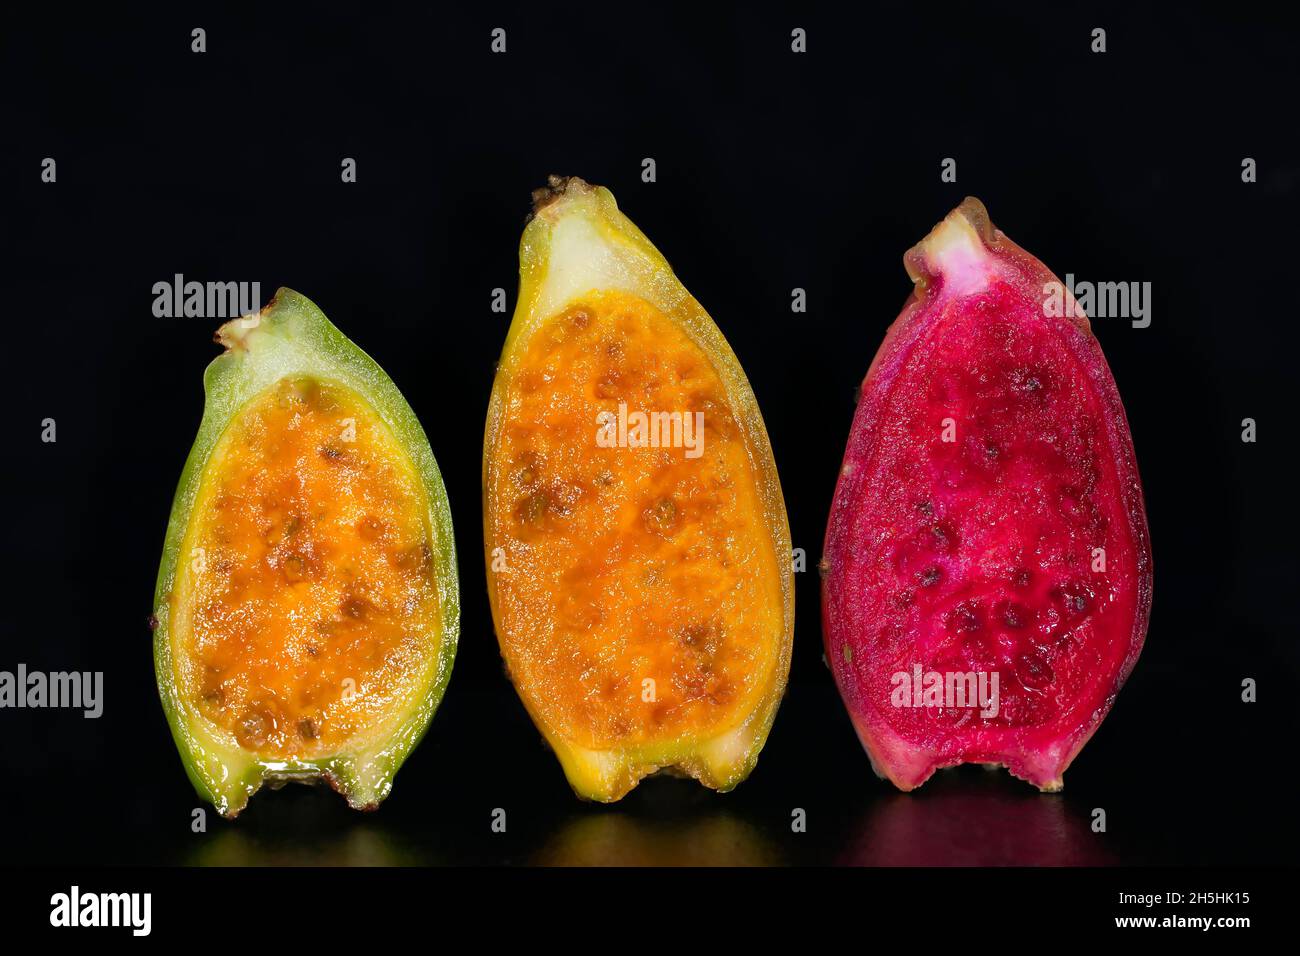 Halved cactus fruits in three different states of ripeness, studio photography with black background Stock Photo